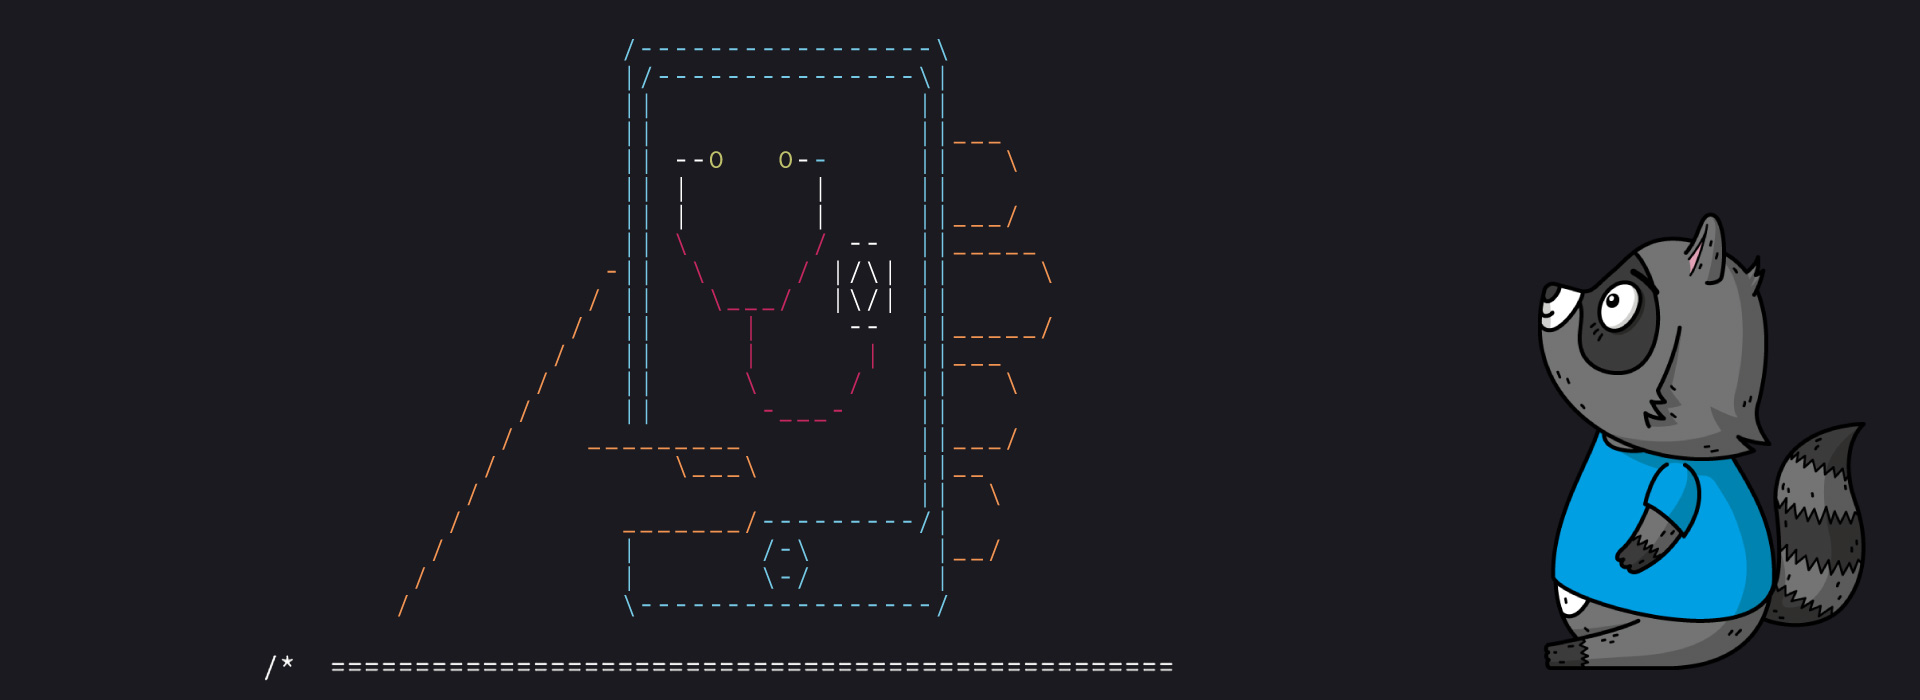 An image of a mobile phone with a stethoscope on screen made with ASCII art, next to an illustration of Bit the Raccoon.